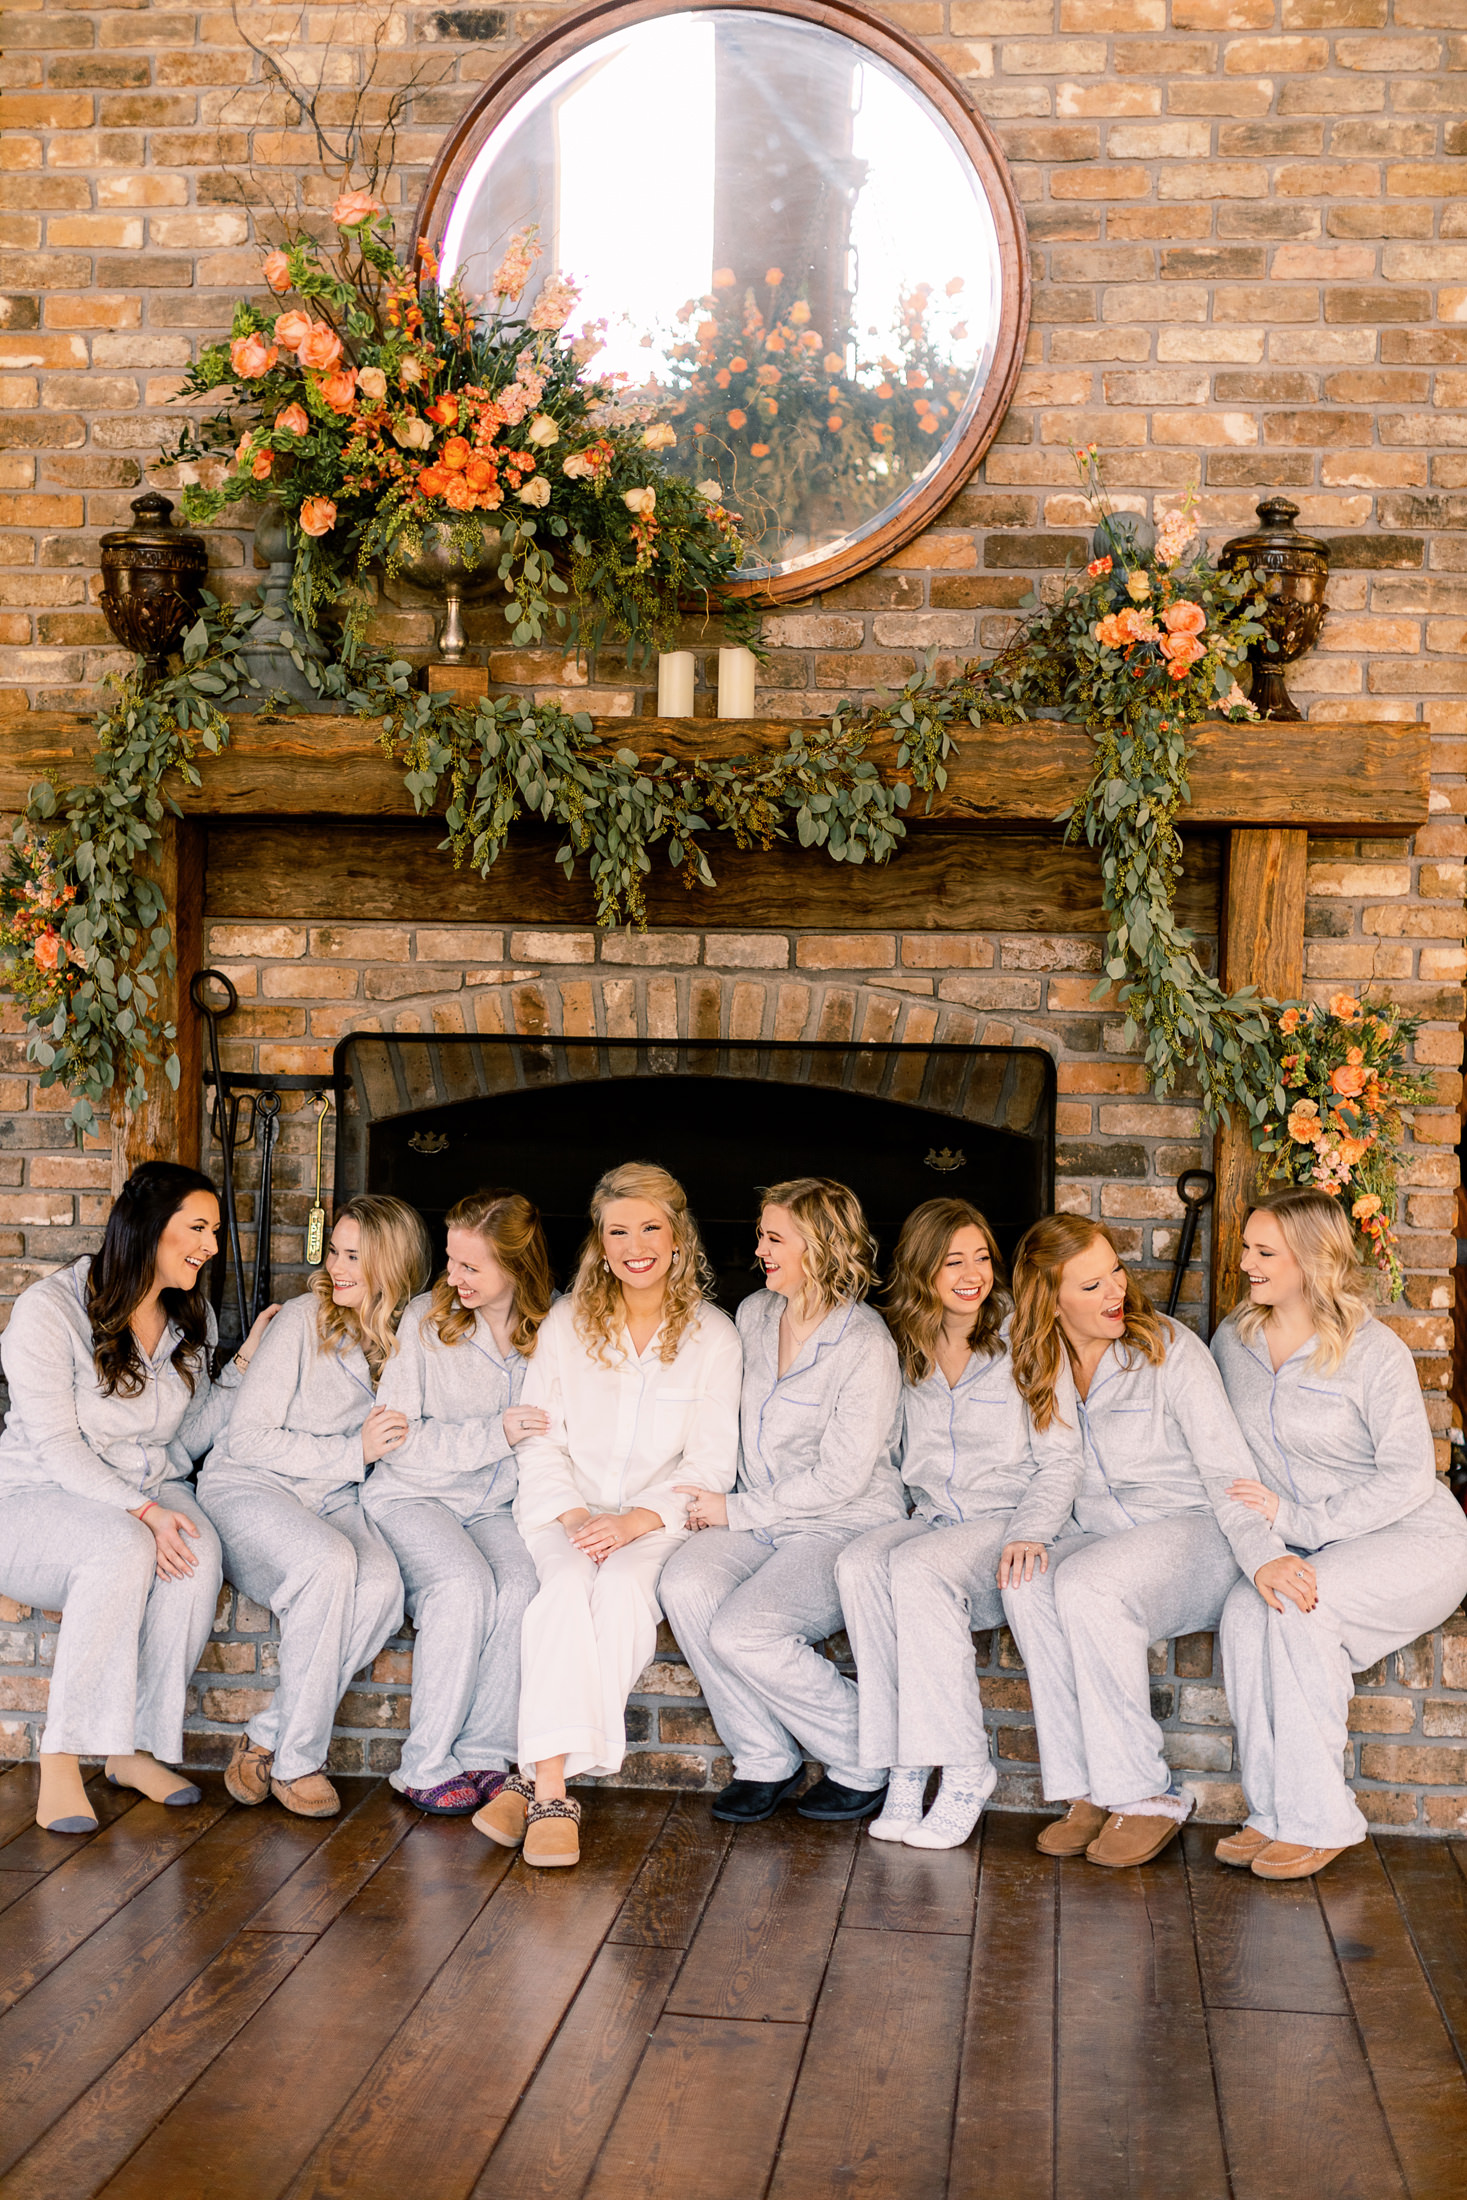 Bridesmaids in getting ready attire sitting in front of a fireplace decorated with floral arrangements